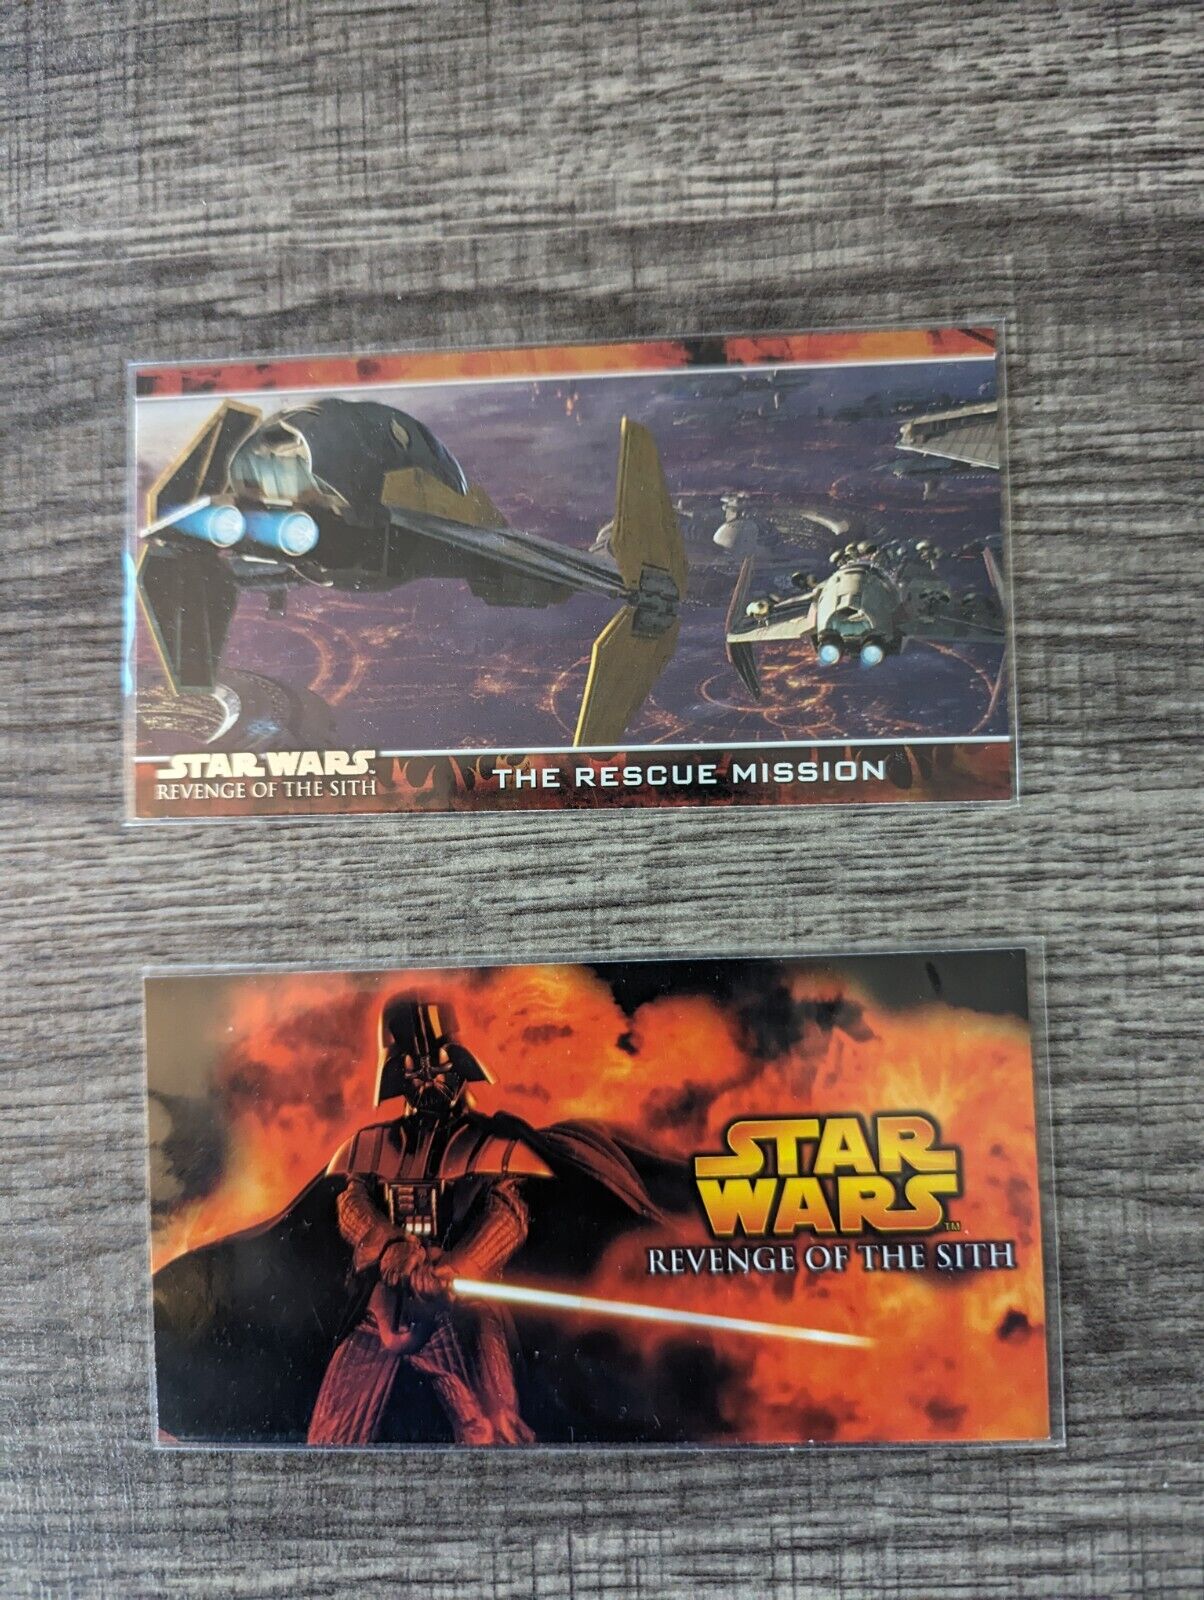 2005 TOPPS WIDEVISION STAR WARS REVENGE OF THE SITH MEGA SET  - 20TH ANNV COMING